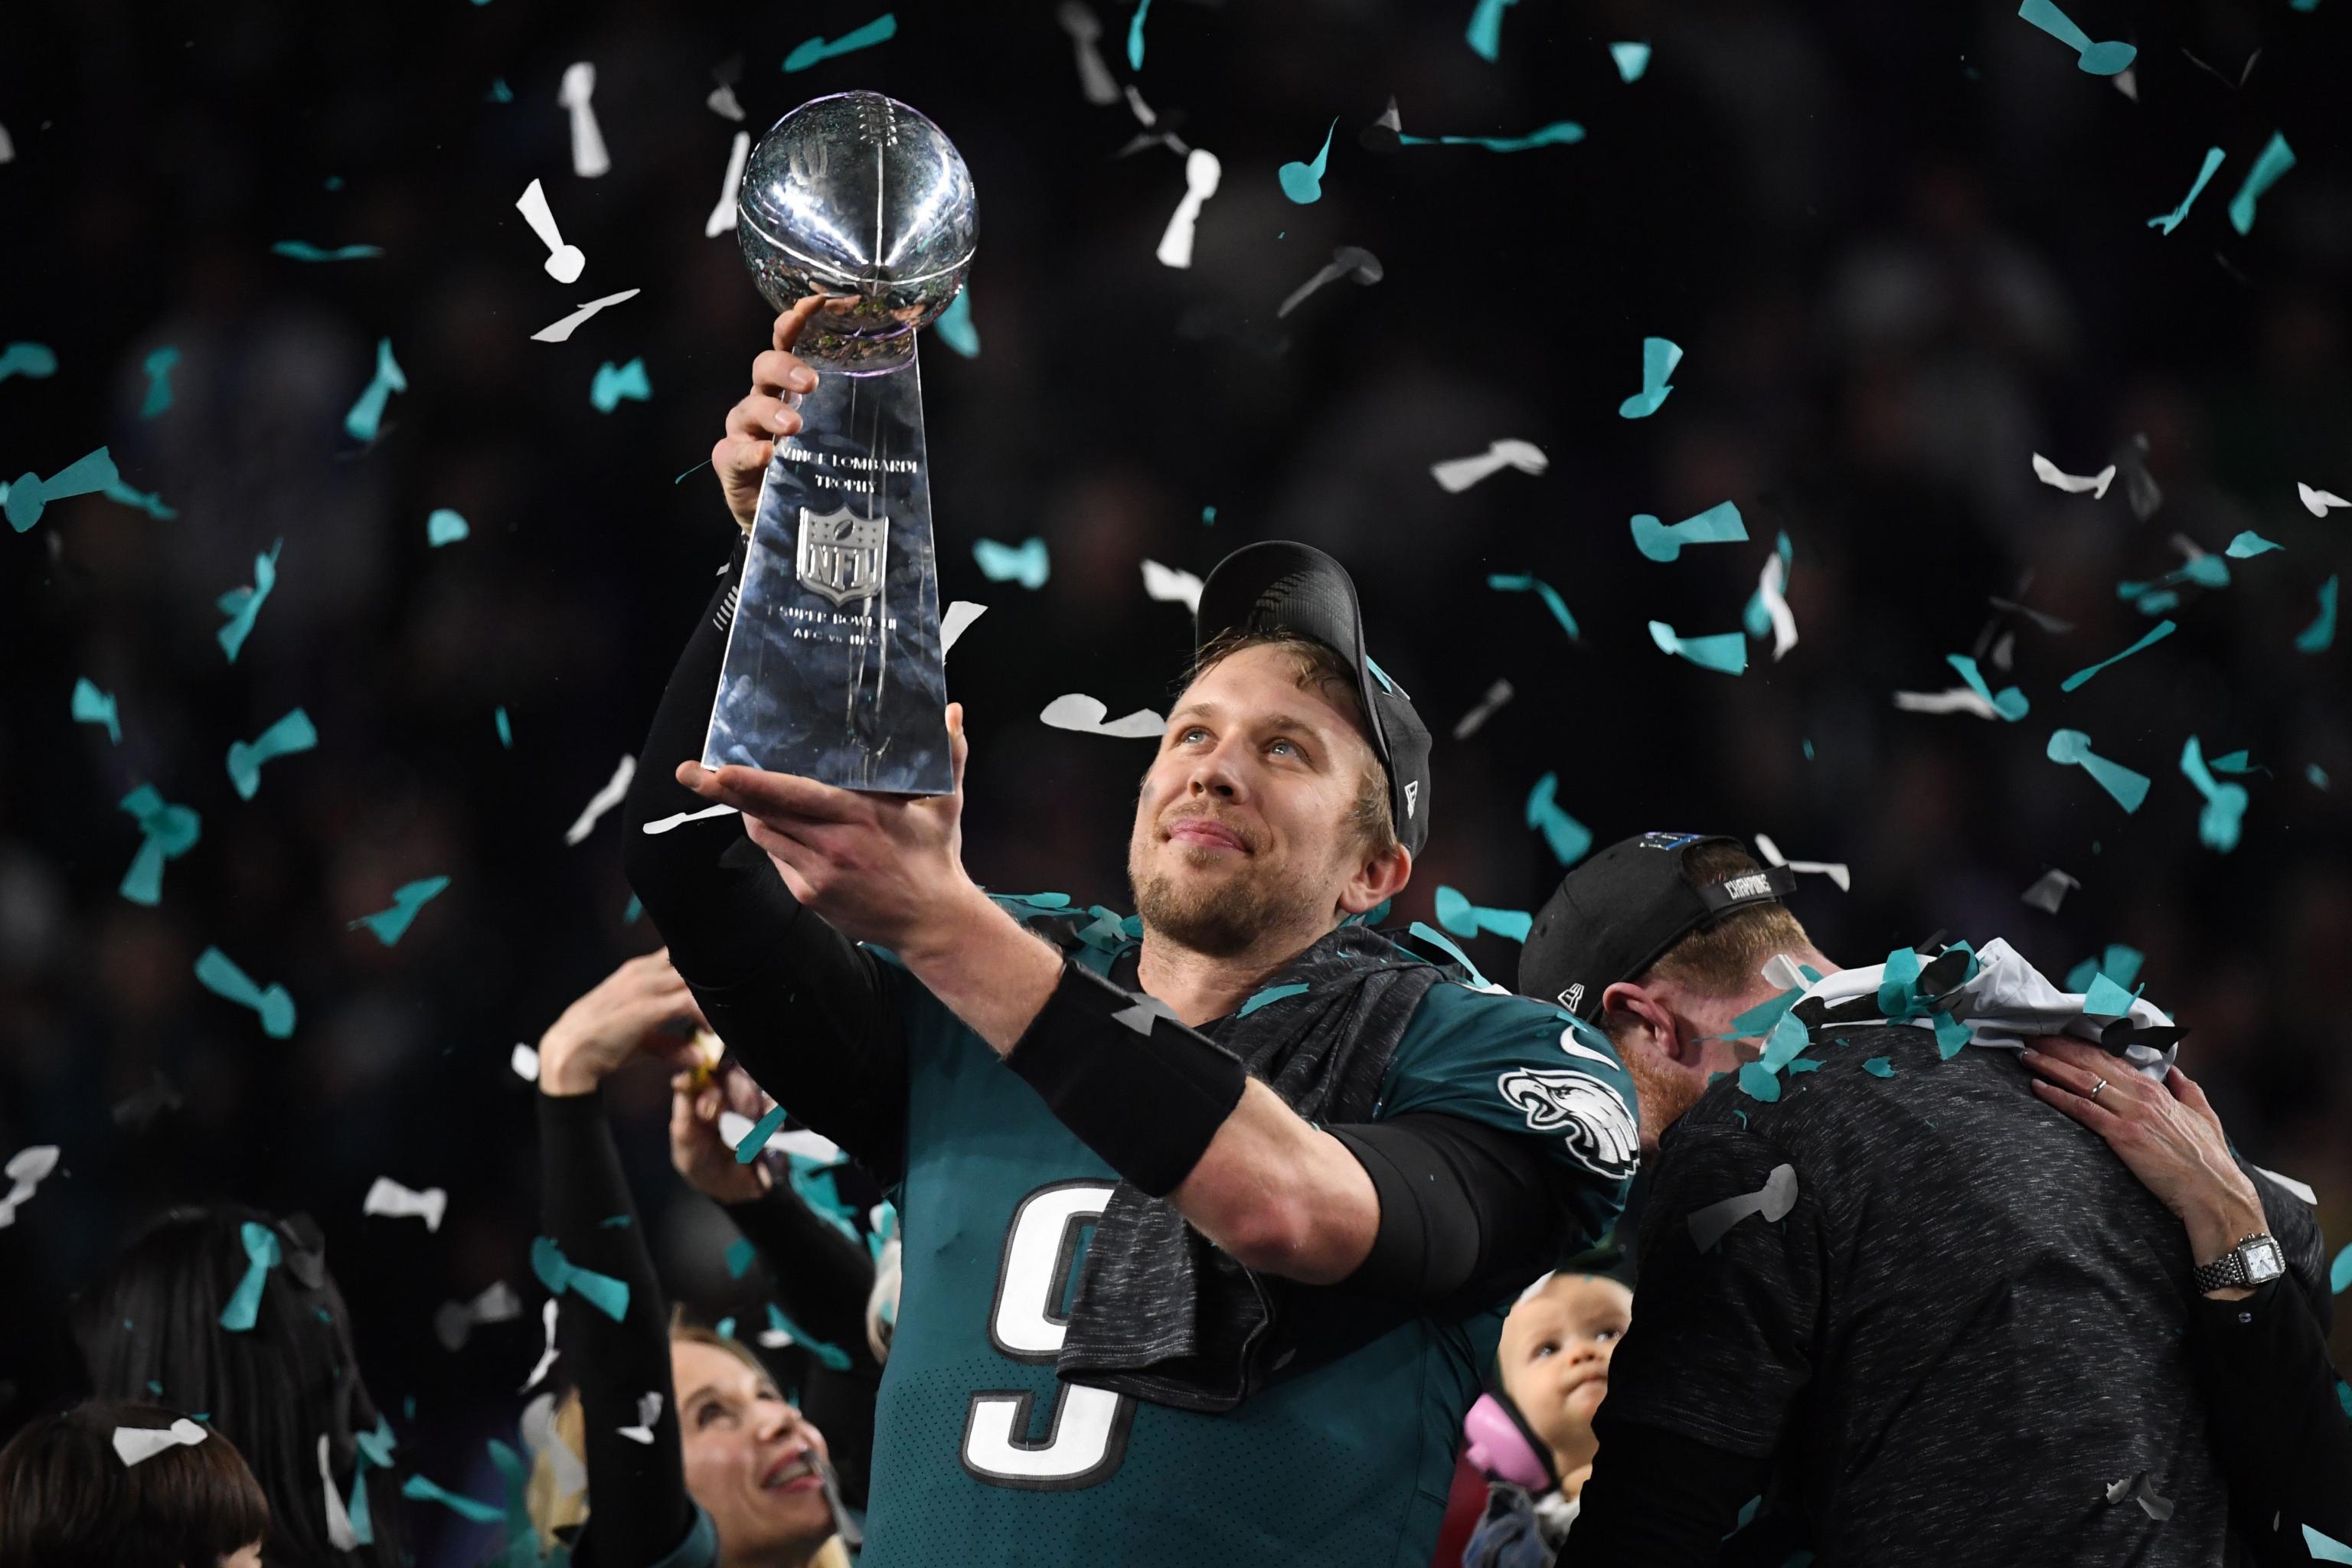 Eagles Super Bowl parade: Date, time, route and other details